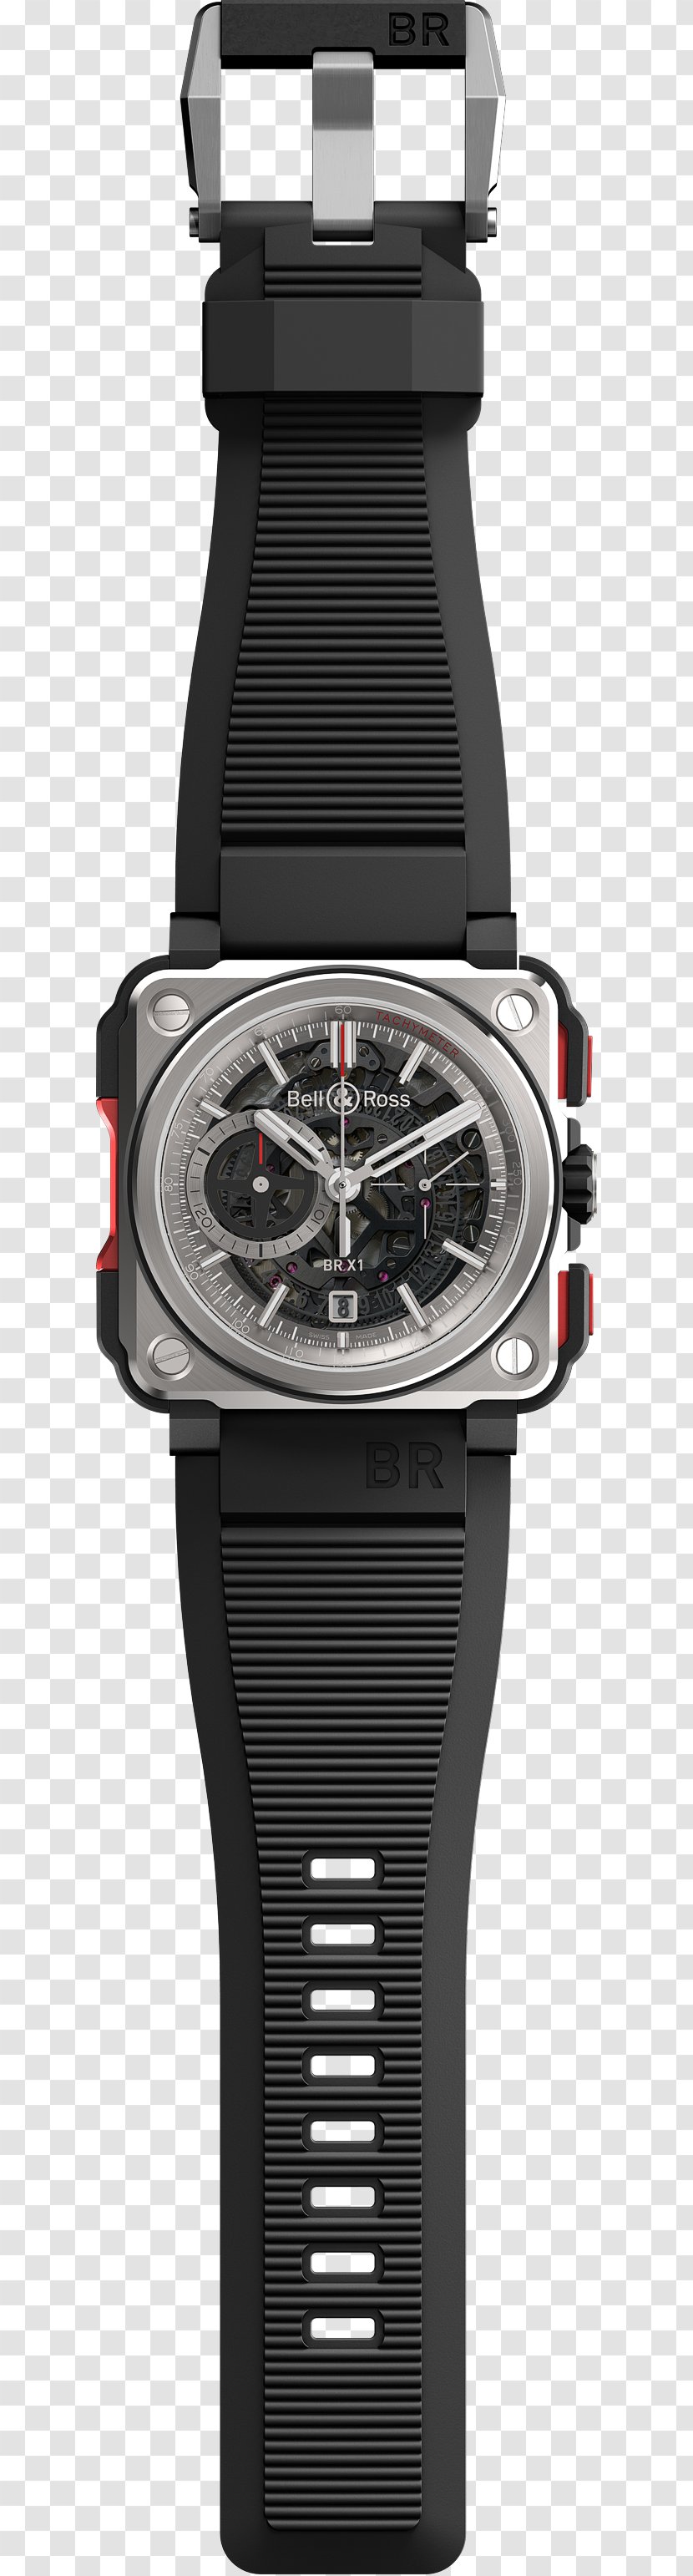 Watch Strap Bell & Ross Chronograph Transparent PNG